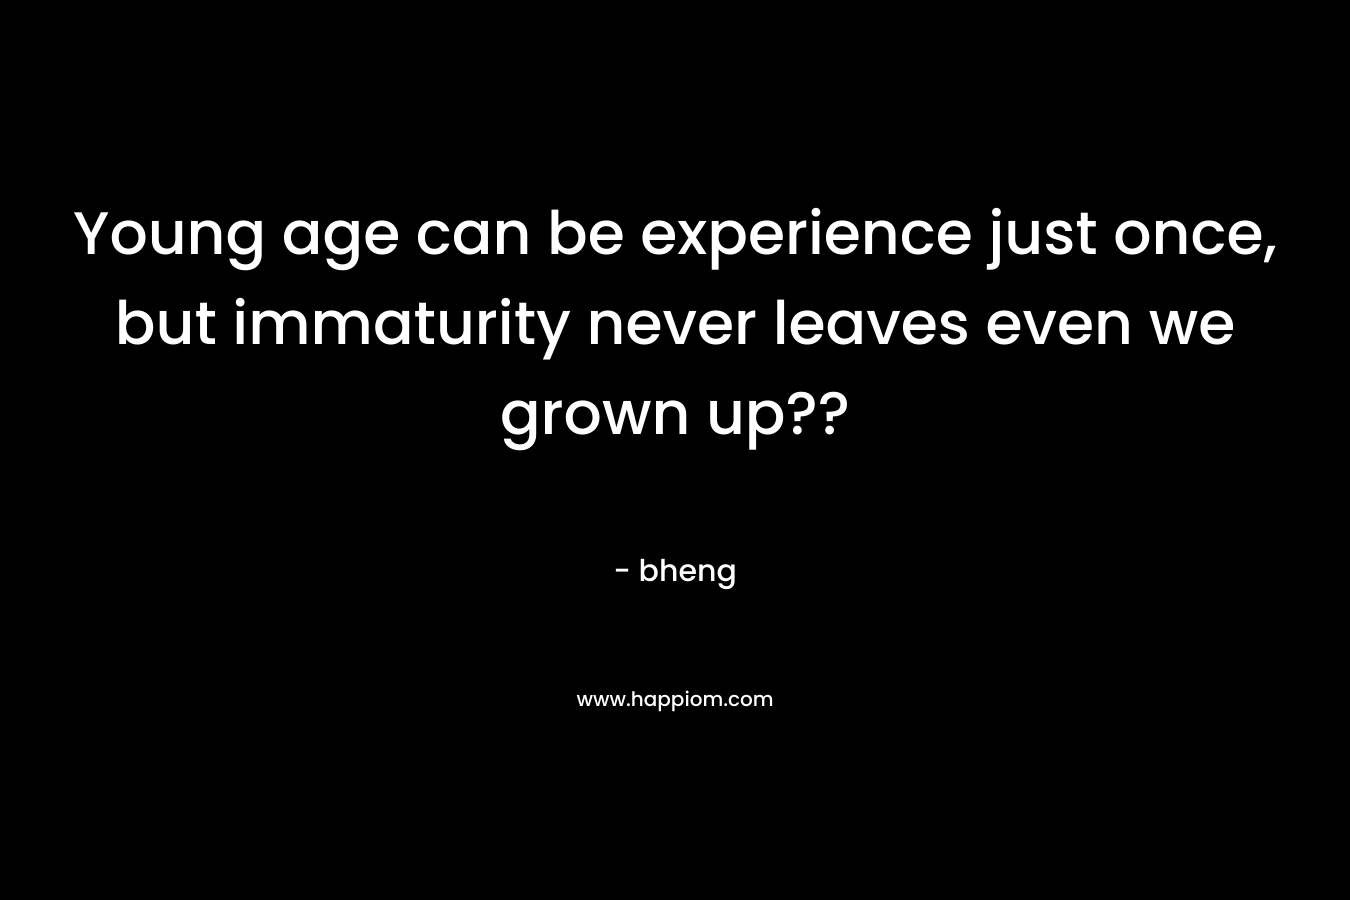 Young age can be experience just once, but immaturity never leaves even we grown up?? – bheng